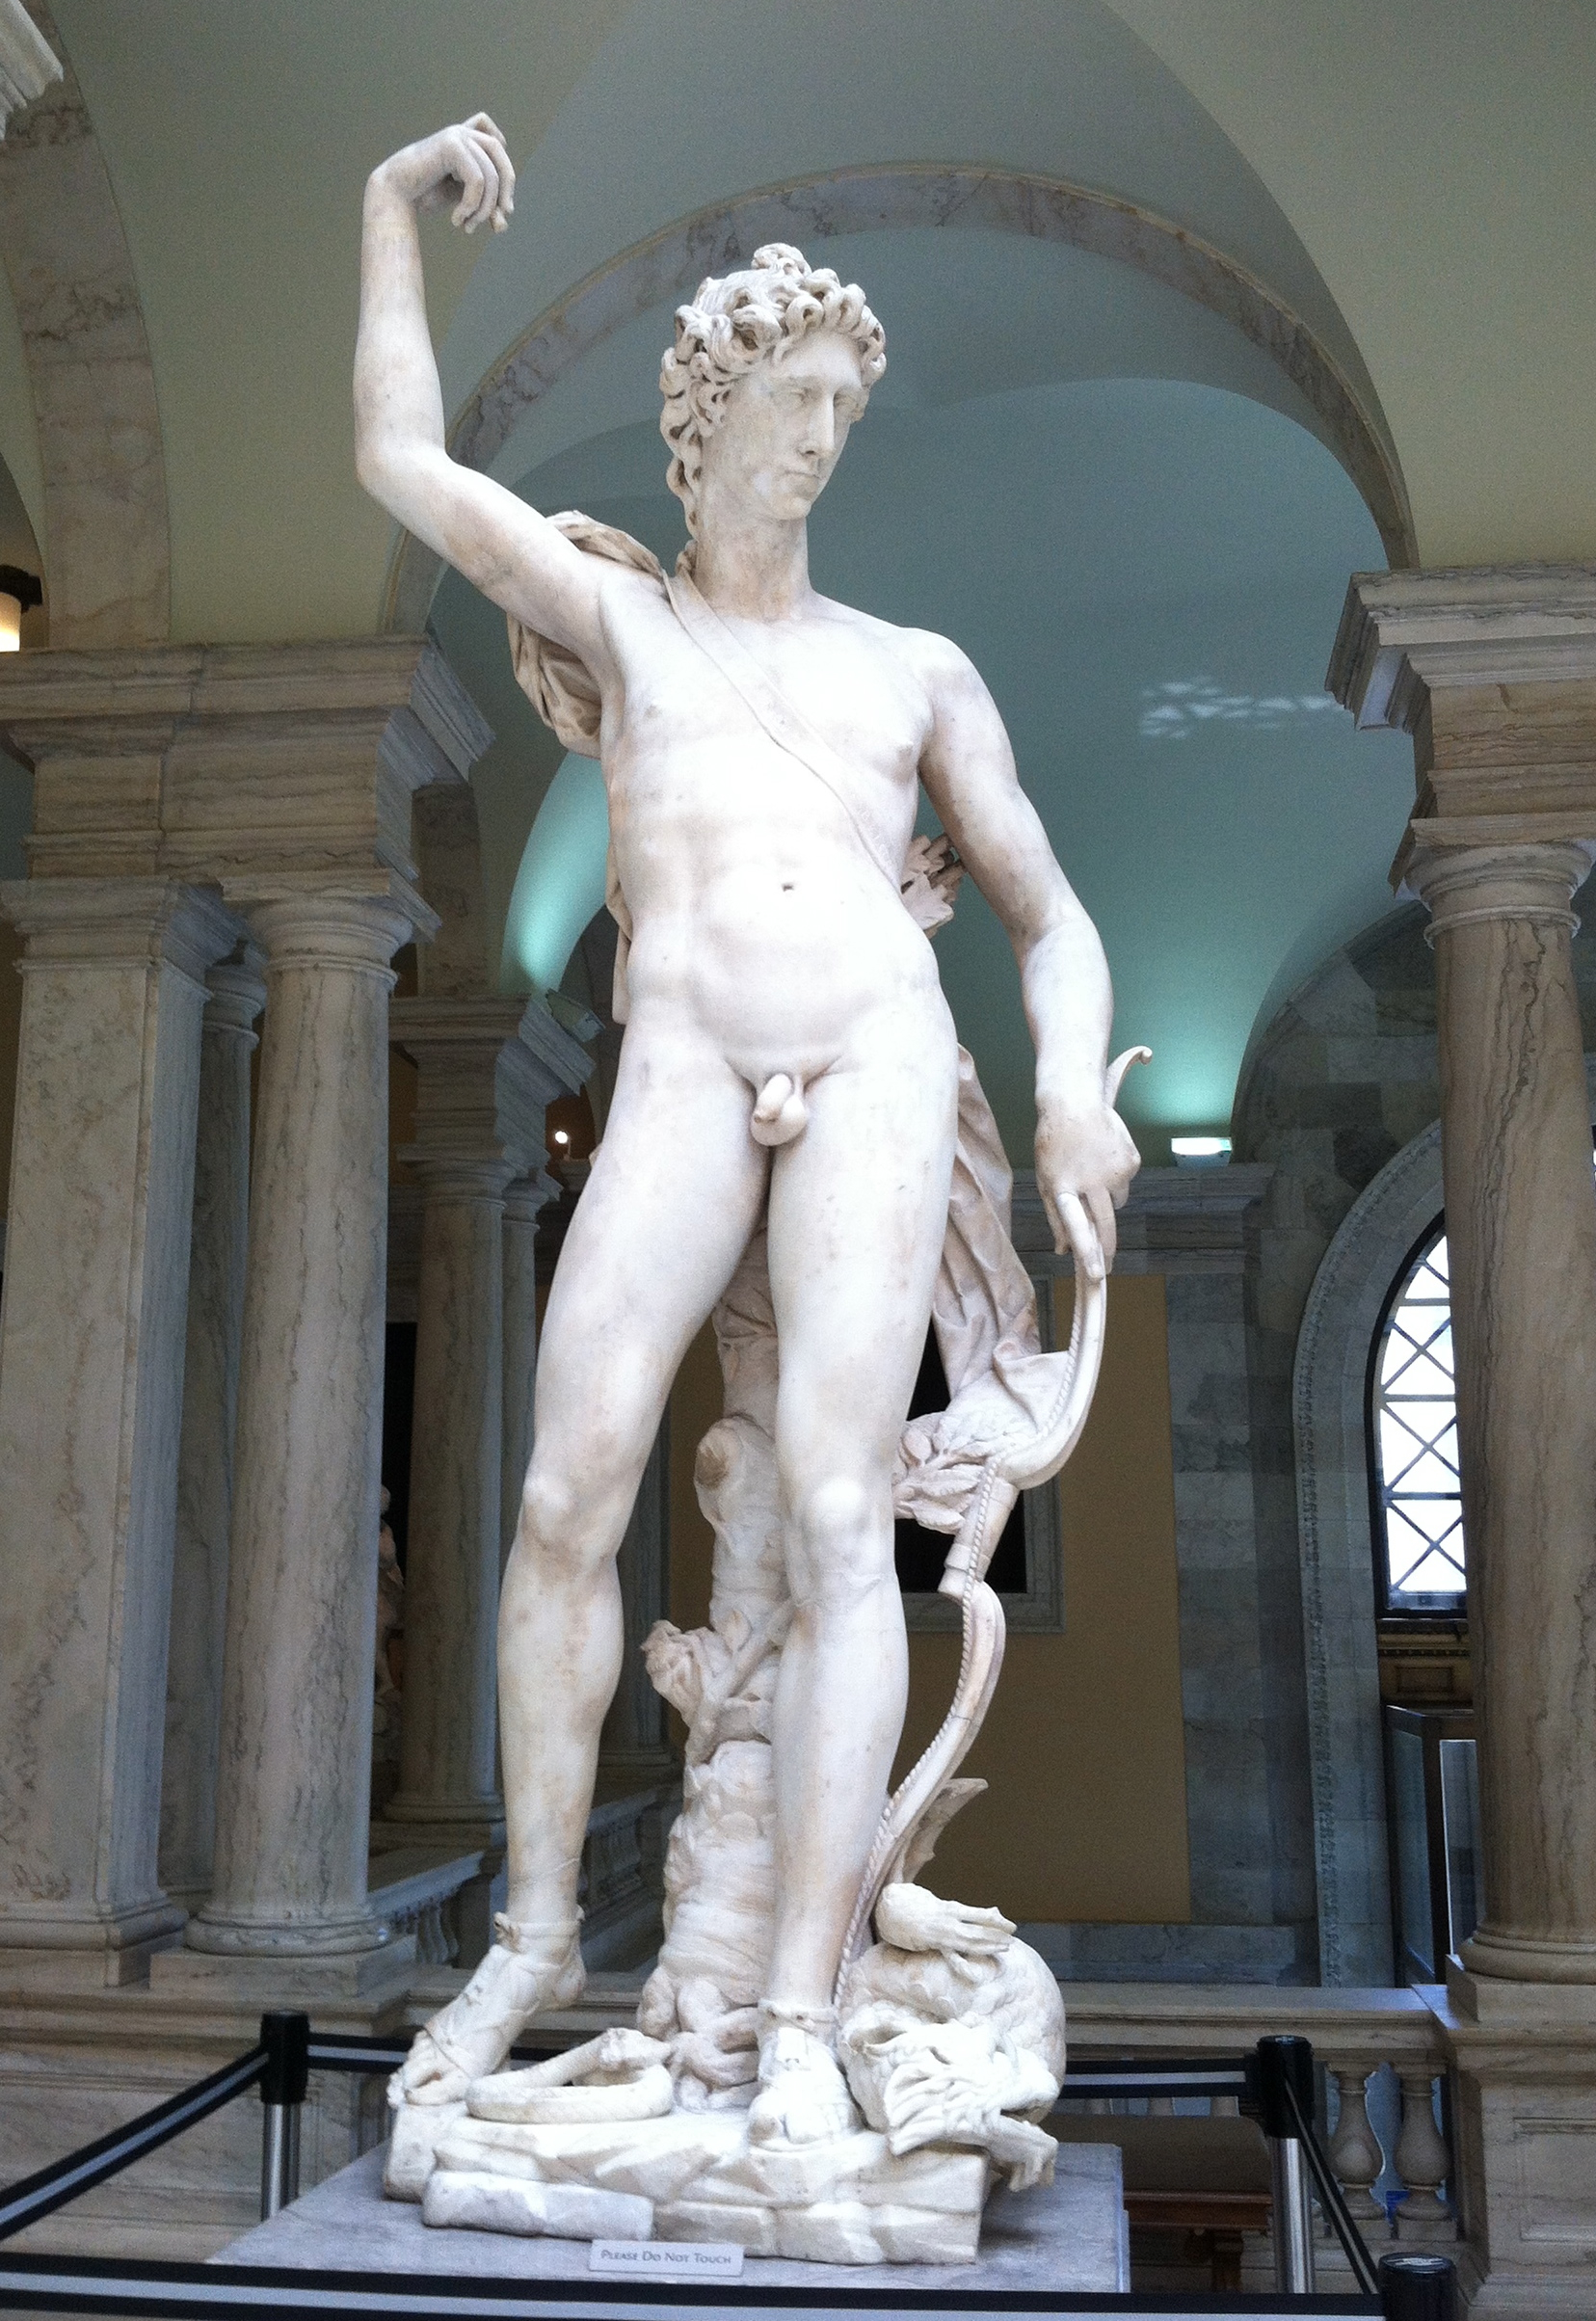 Statue of Greek god Apollo on display in the Walters Art Museum.